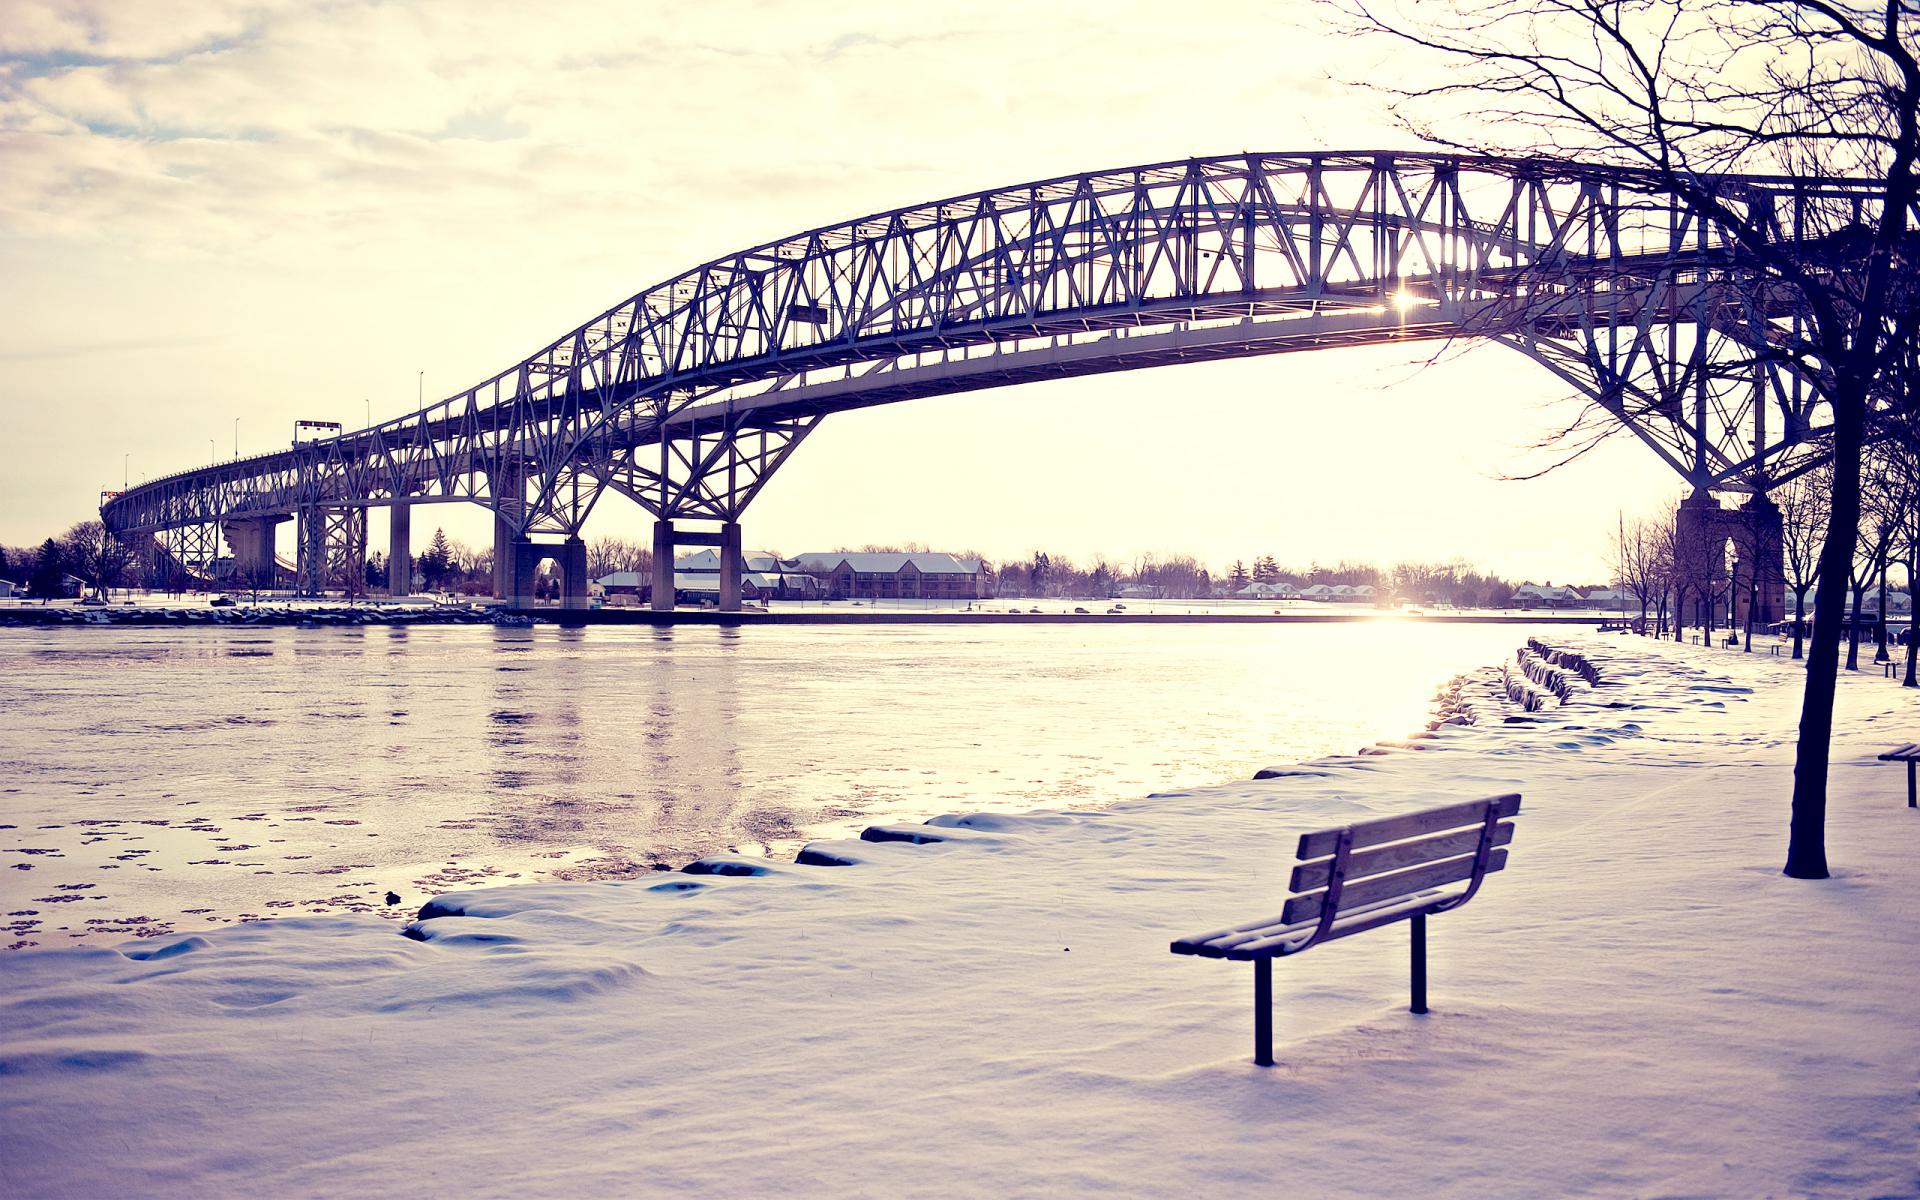 world, Architecture, Bridges, Steel, Structure, Metal, Sky, Clouds, Sunlight, Roads, Rivers, Ice, Water, Shore, Landscapes, Winter, Snow, Seasons, Scenic, Bench, Trees, Buildings Wallpaper